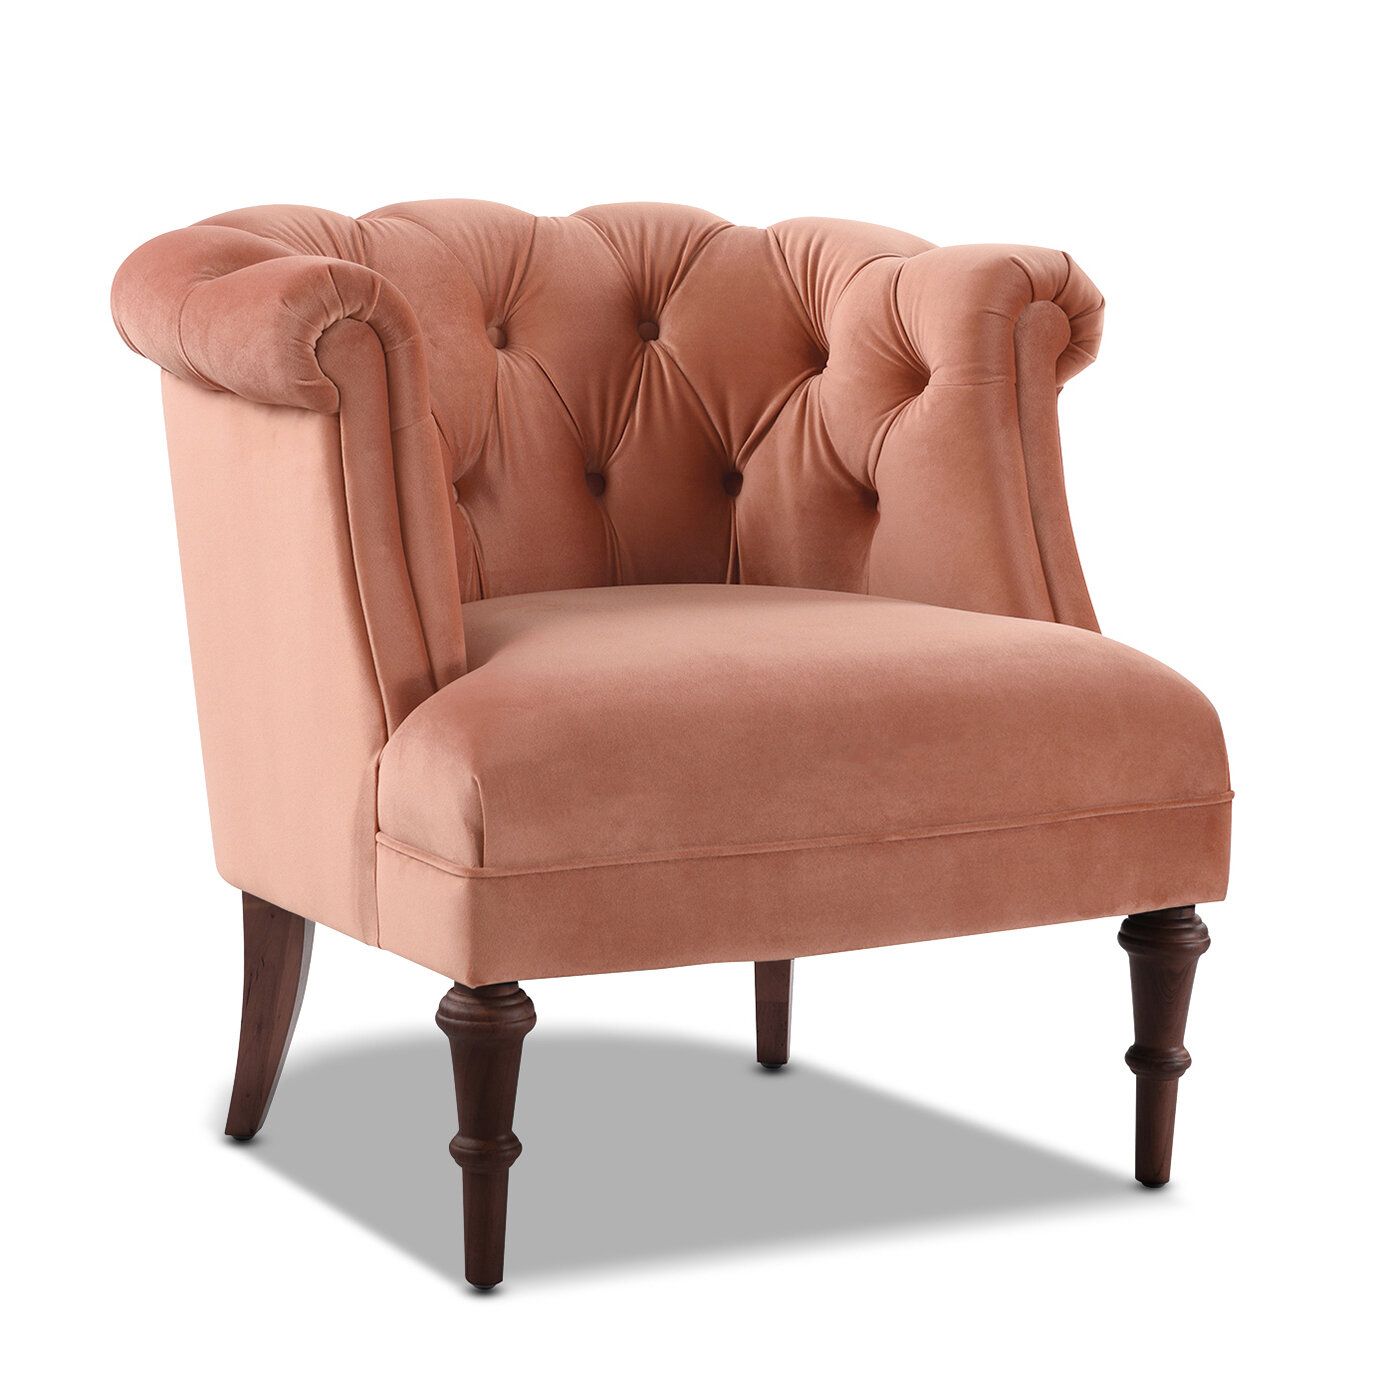 Brown Orange Accent Chairs You'Ll Love In 2021 | Wayfair With Regard To Artressia Barrel Chairs (View 15 of 15)